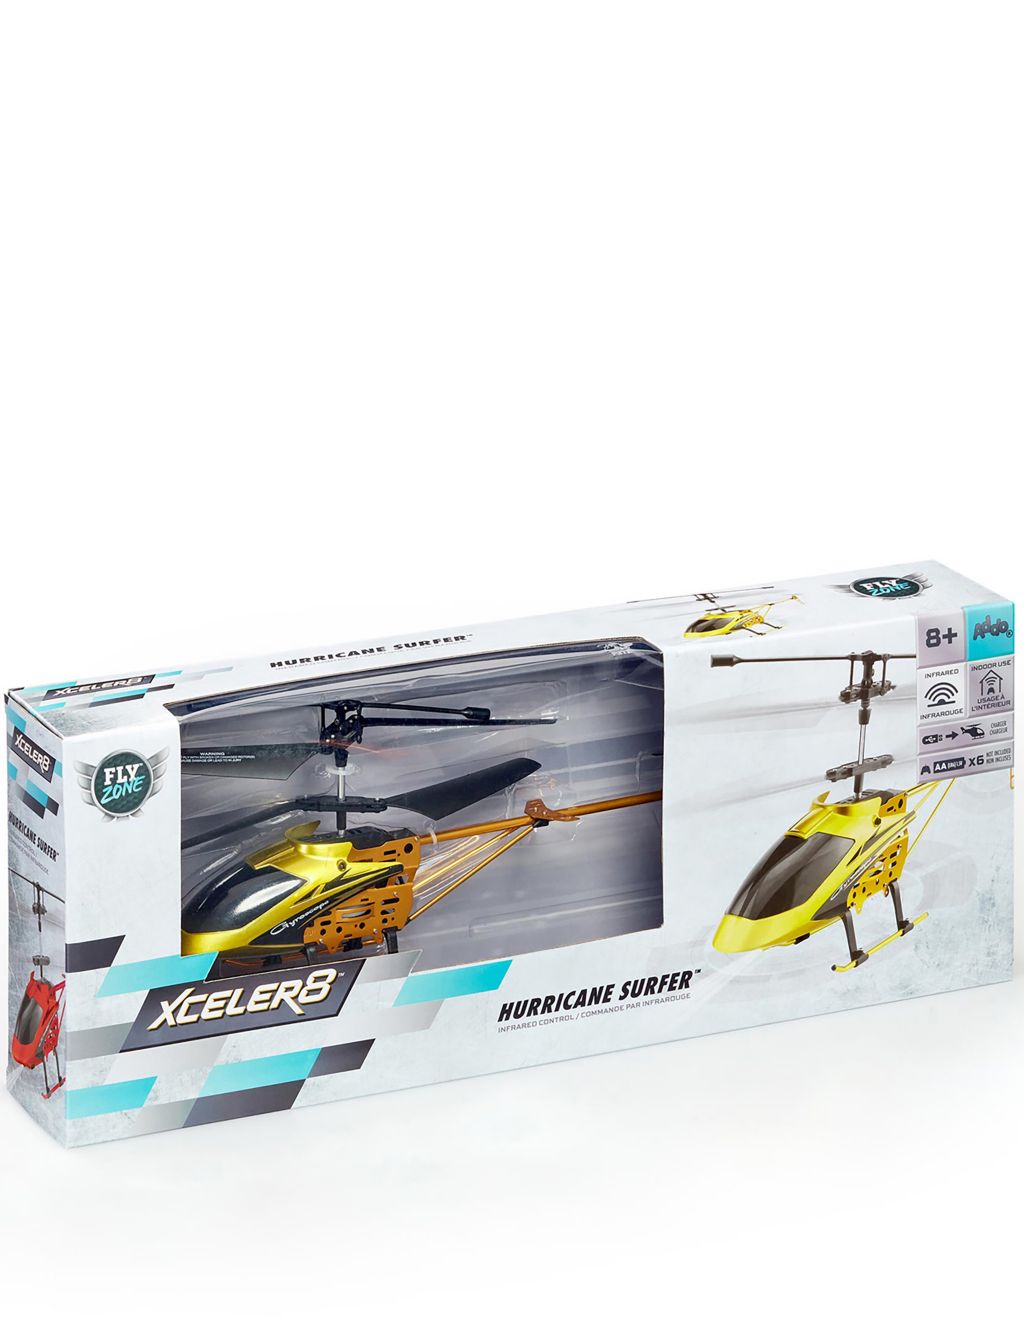 Hurricane Surfer Helicopter (8+ Yrs)